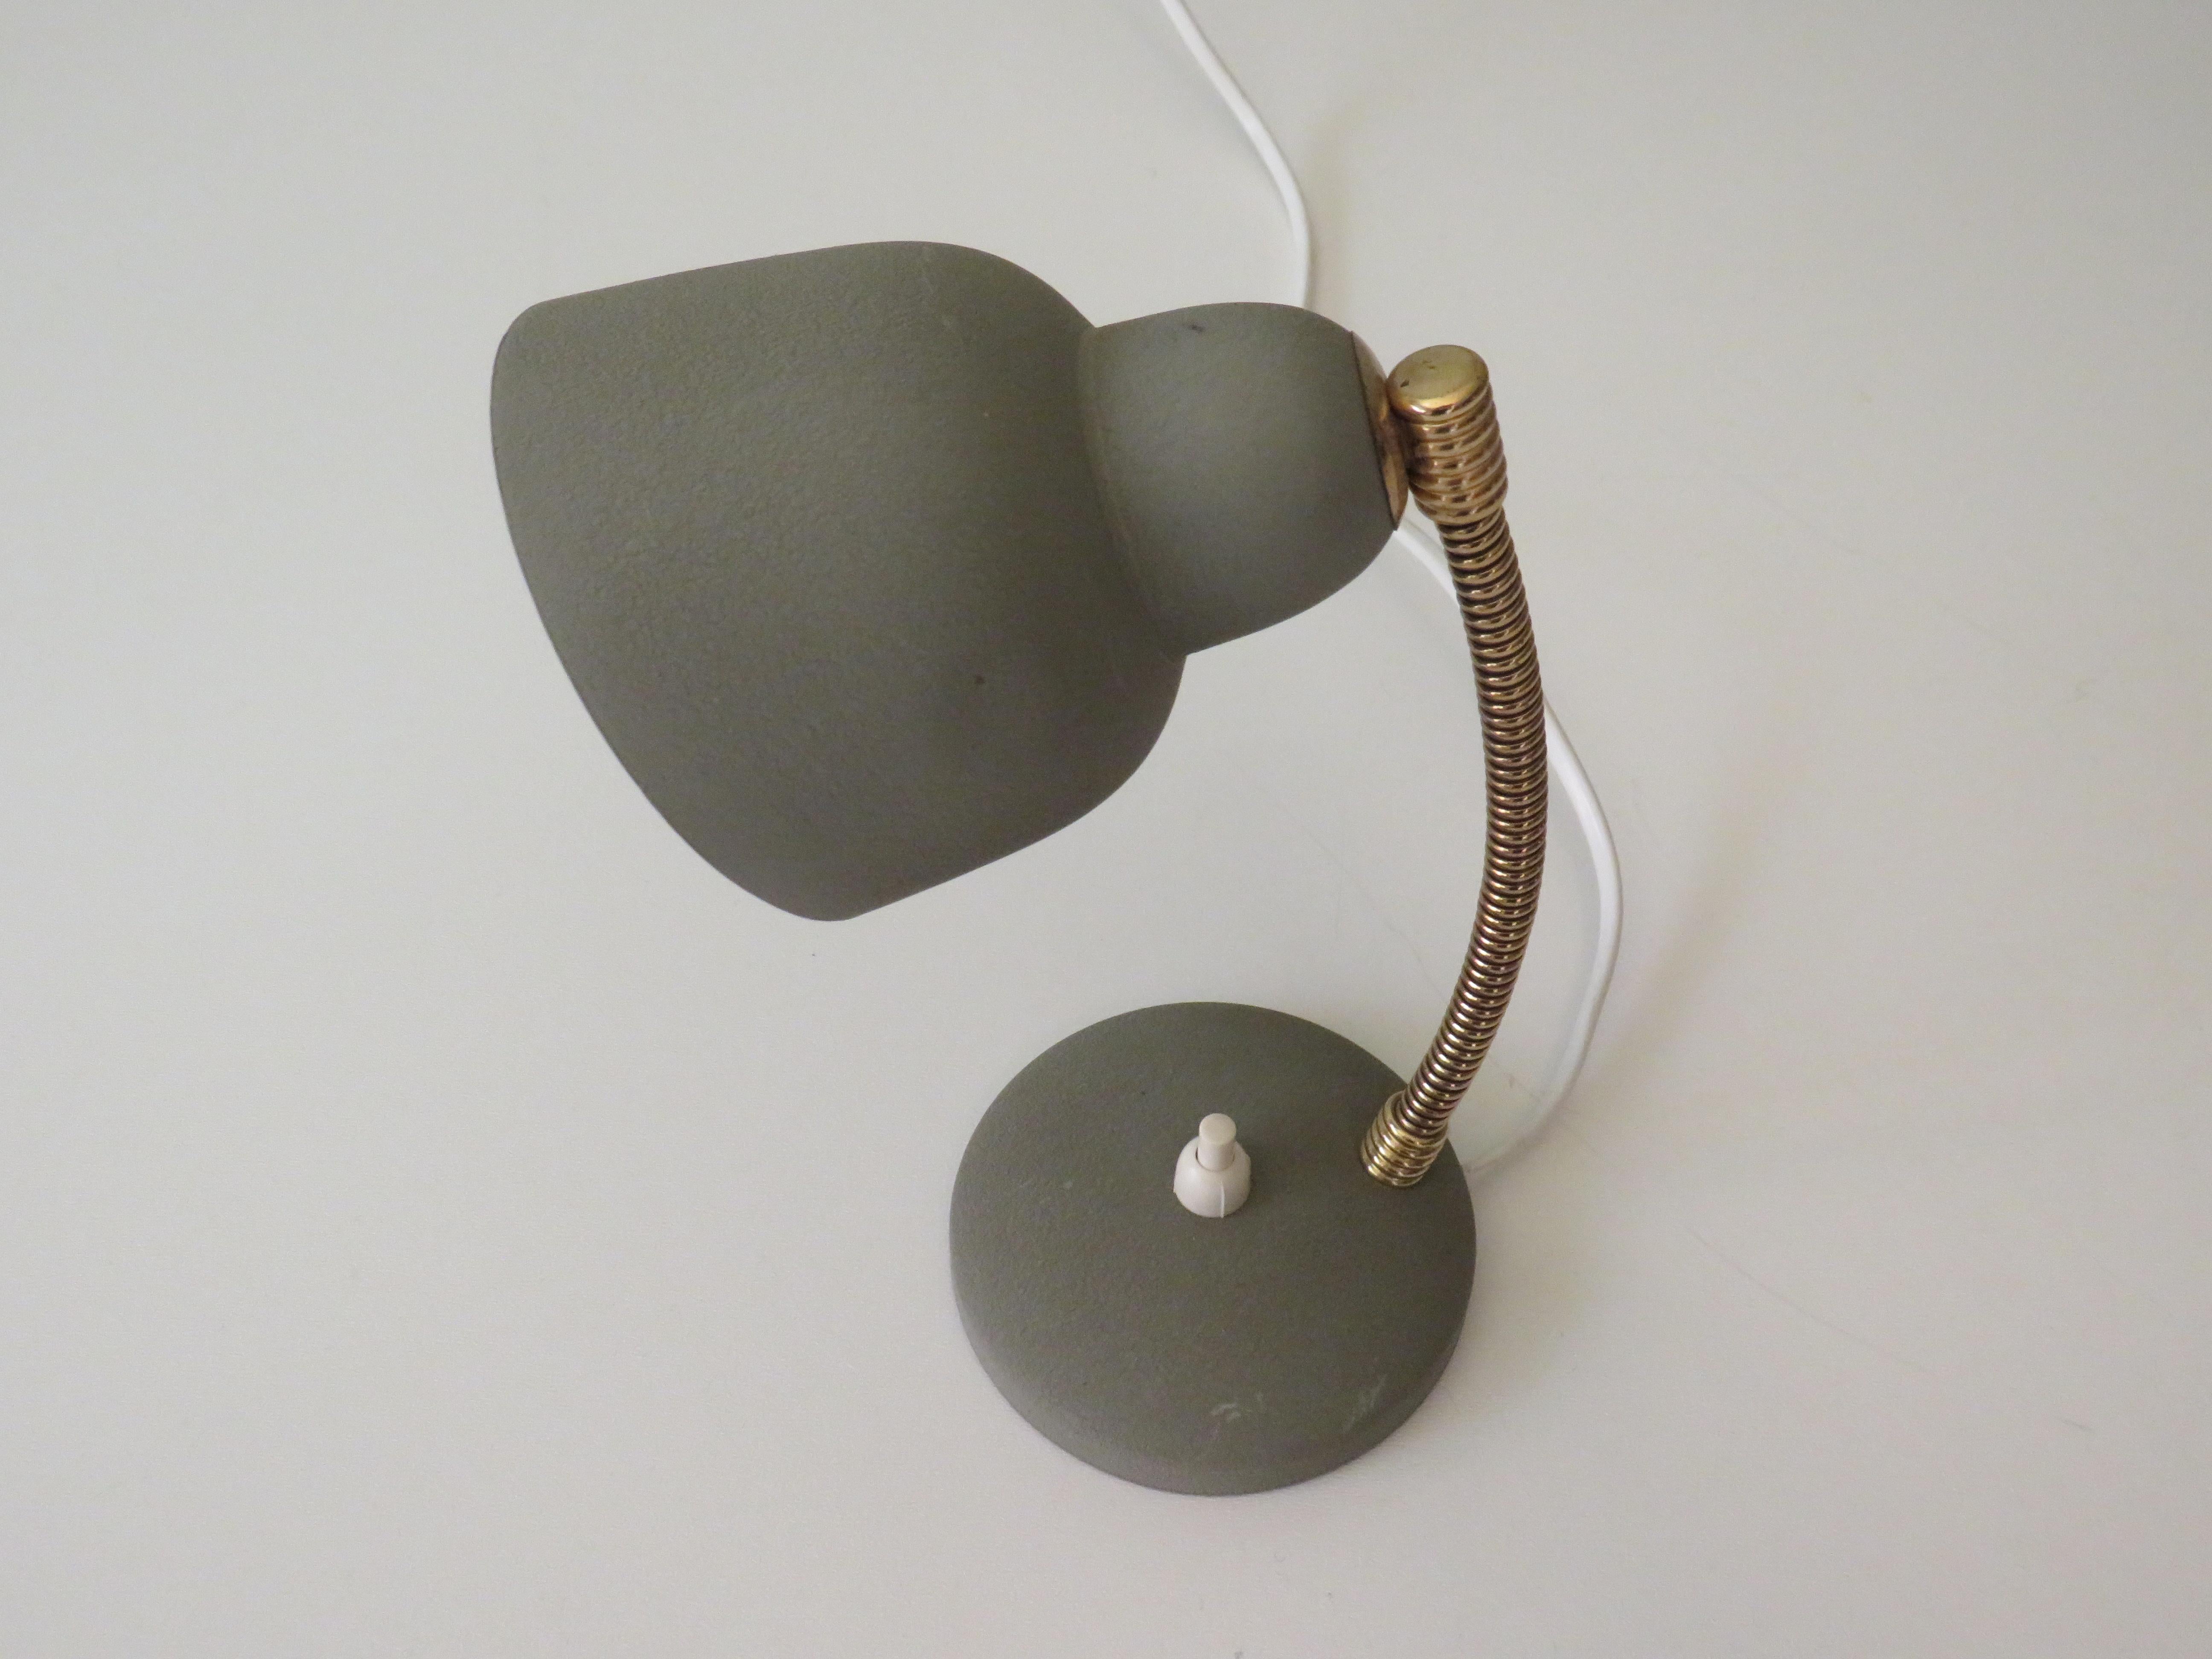 2 Desk Lamps - Bedside Lamps from Aluminor, France 1950 2